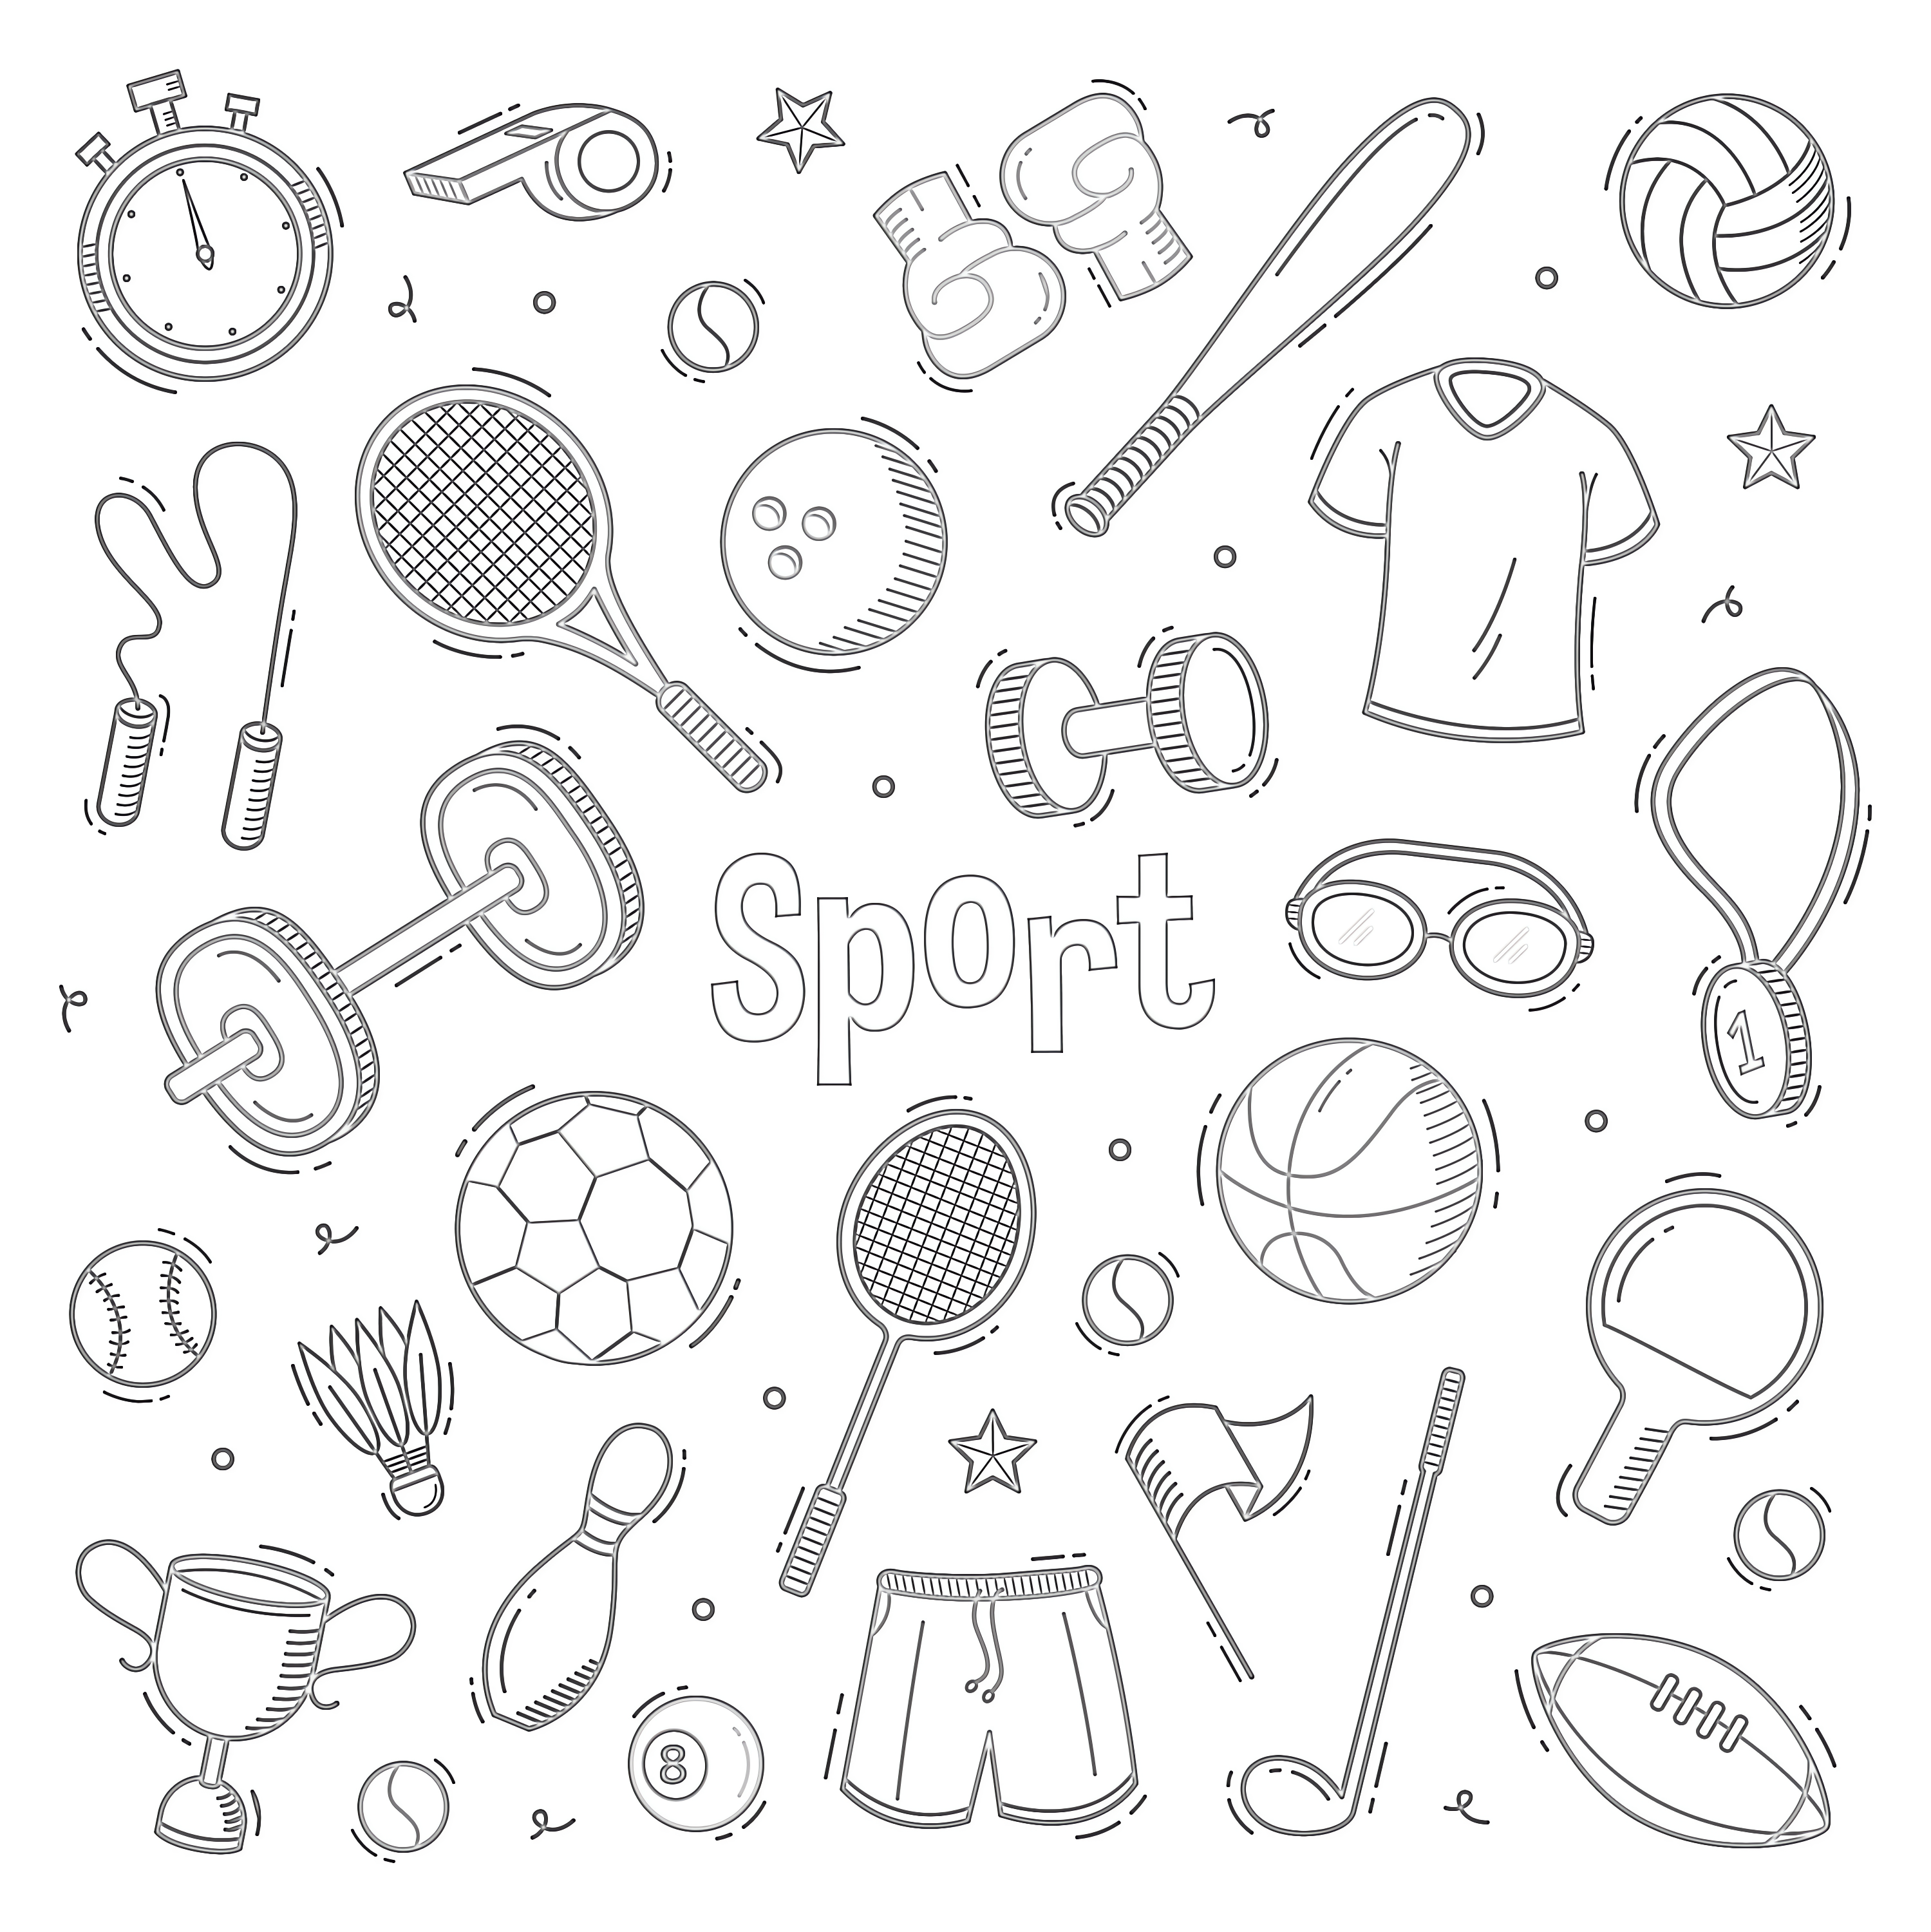 Printable hand drawn doodle sport coloring page